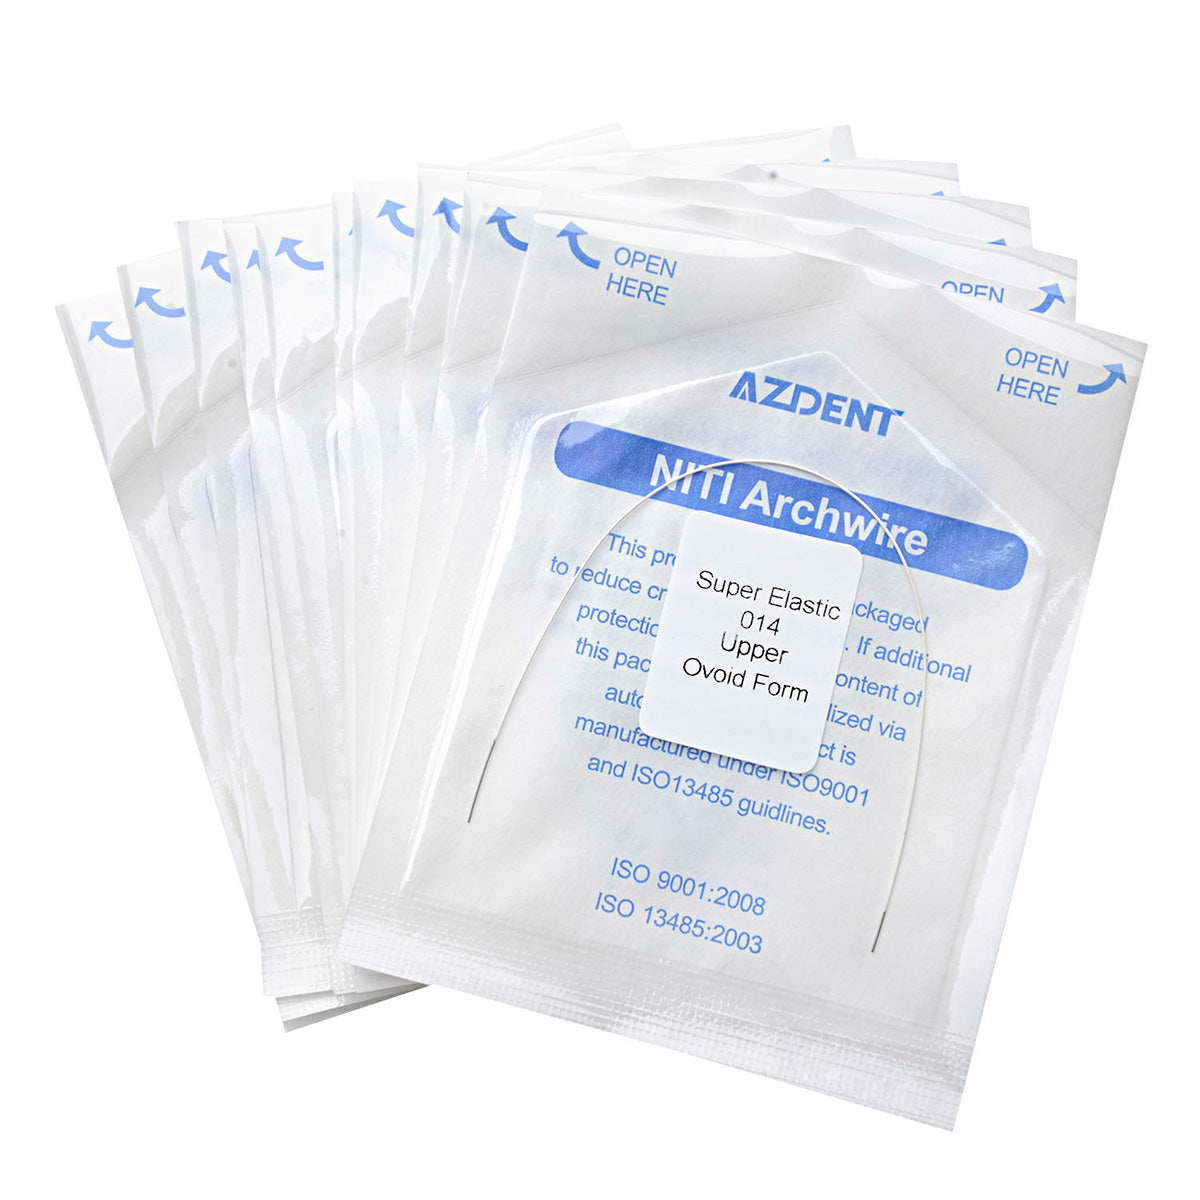 10 Packs AZDENT Archwire NiTi Super Elastic Colored Coated Ovoid Round 0.014 Upper 1pcs/Pack - azdentall.com